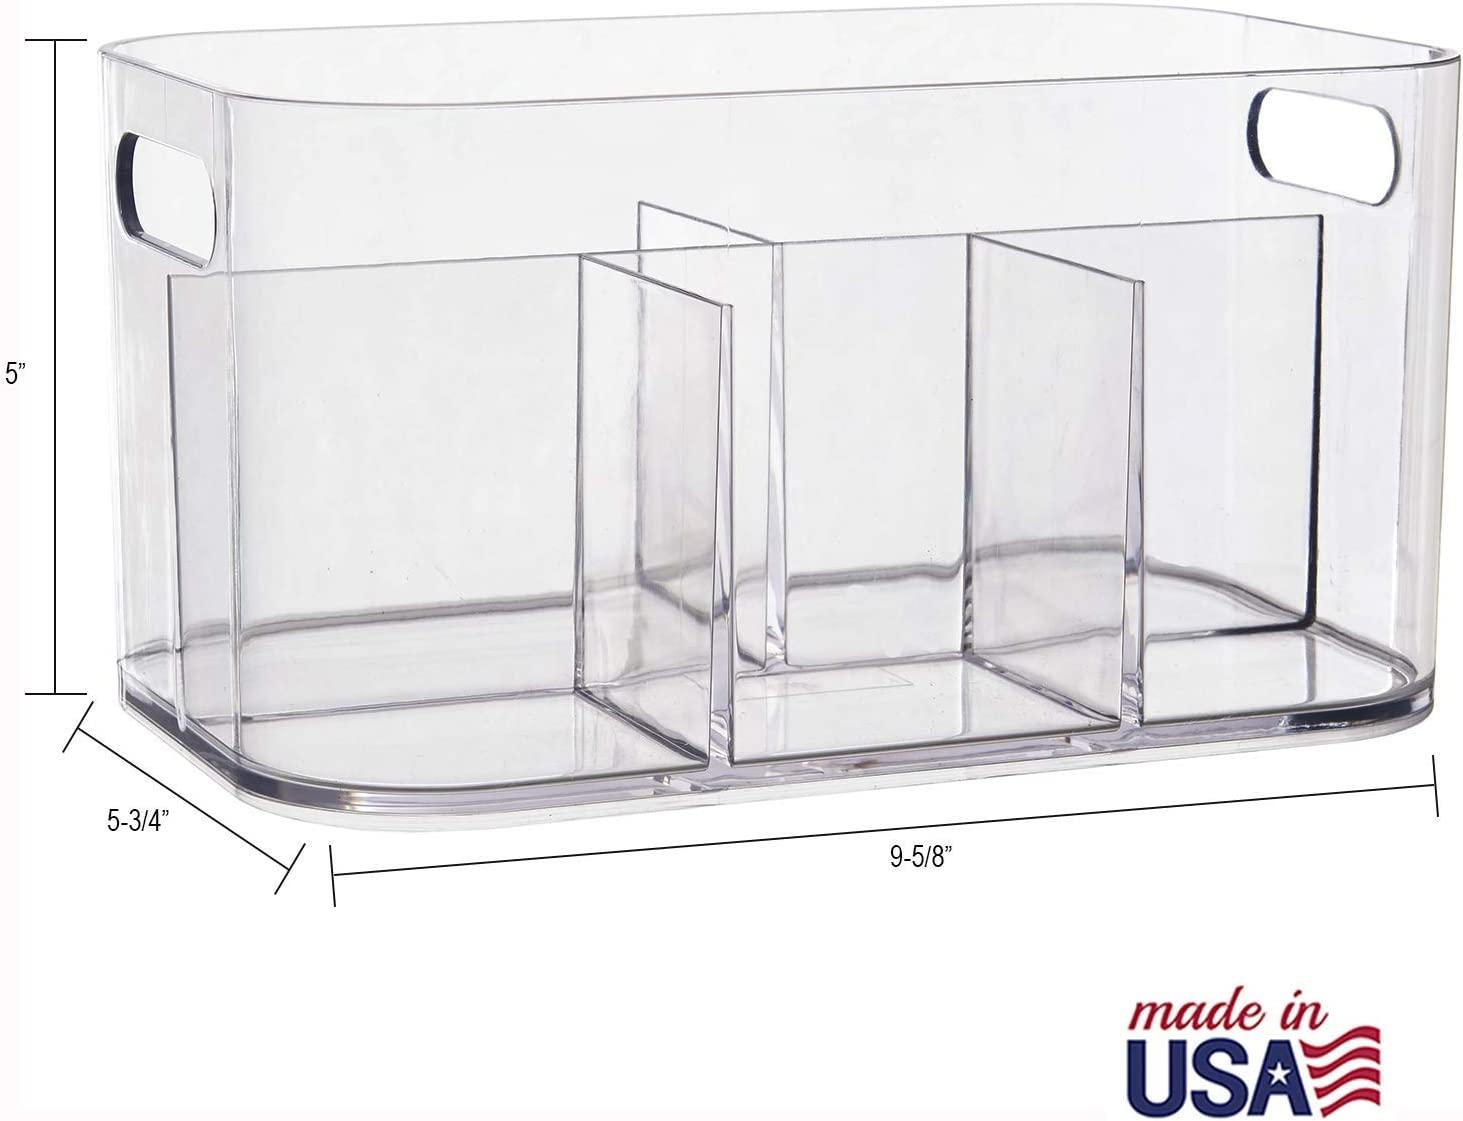 STORi Bliss 10 x 6 Open Compartment Clear Plastic Organizer | Rectangular  Makeup & Vanity Container & Pantry Storage Bin with Pass-Through Handles 